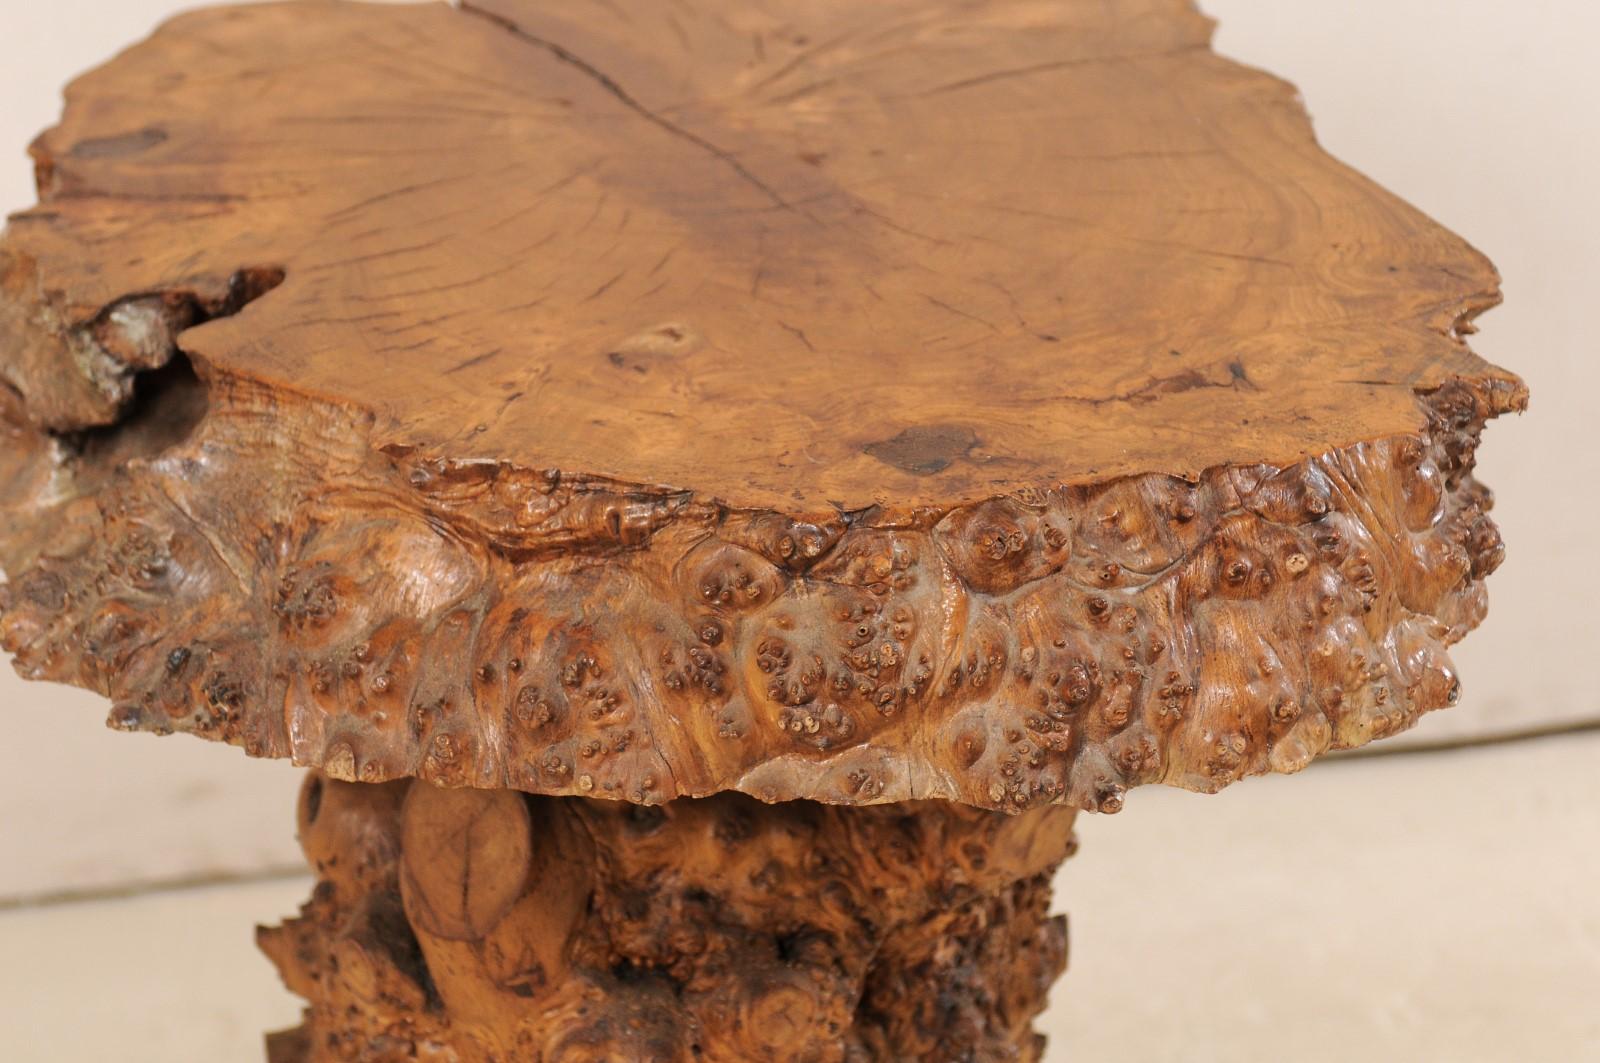 European Live-Edge Burl Side Table with Slab Top & Knobby Texture, Early 20th C. For Sale 3